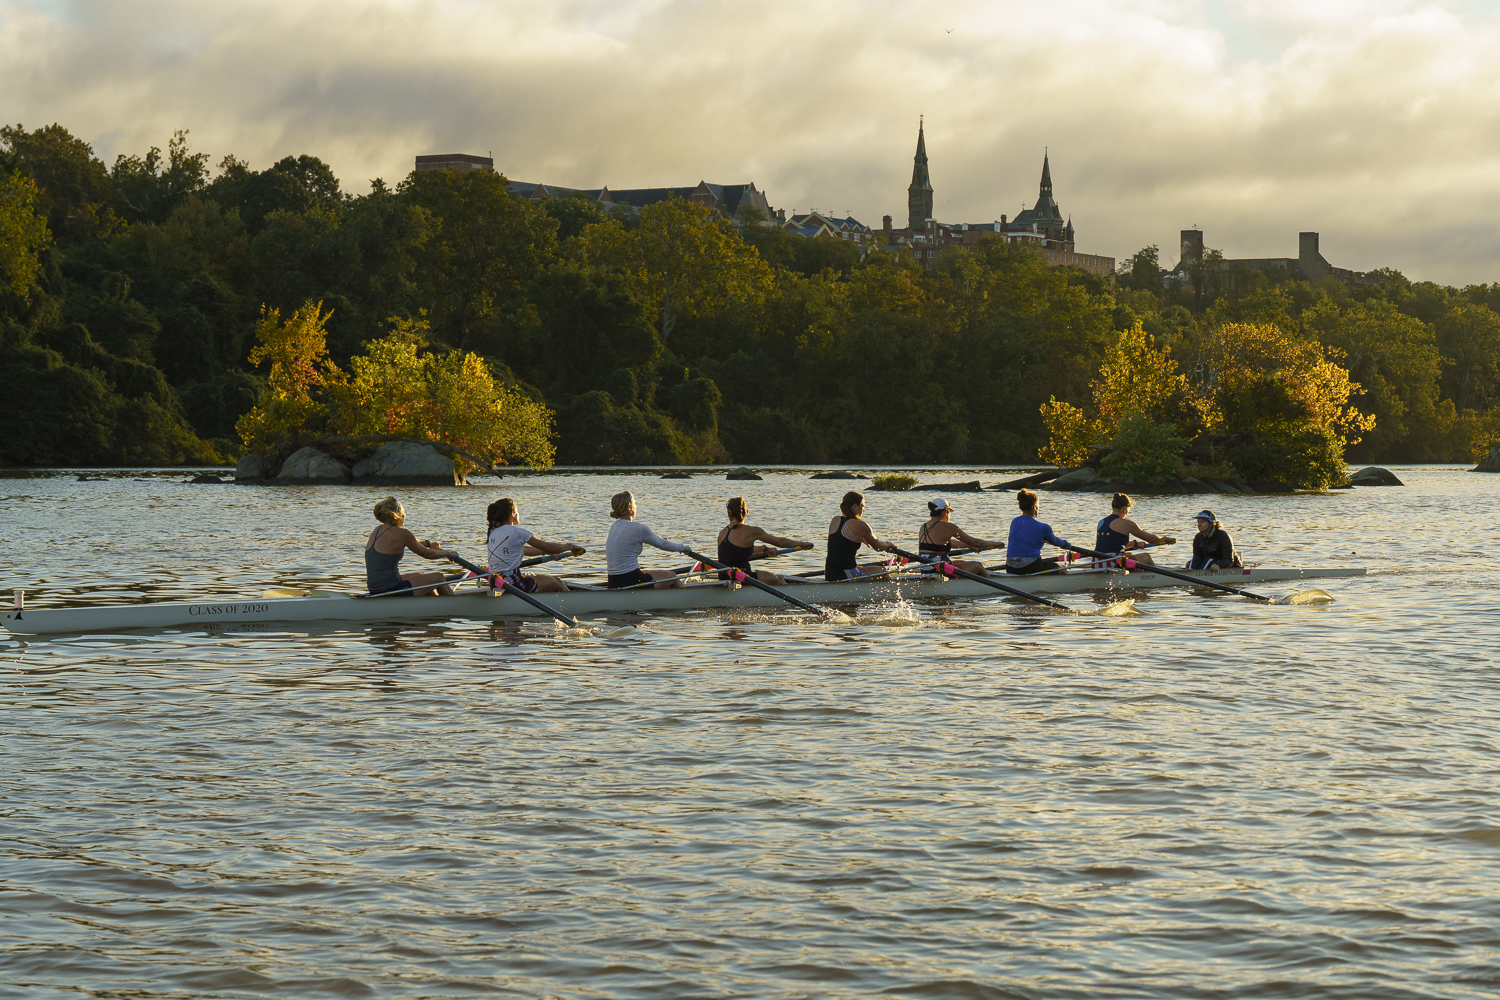 The GW womens rowing team embarks on an early morning practice down the Potomac River.